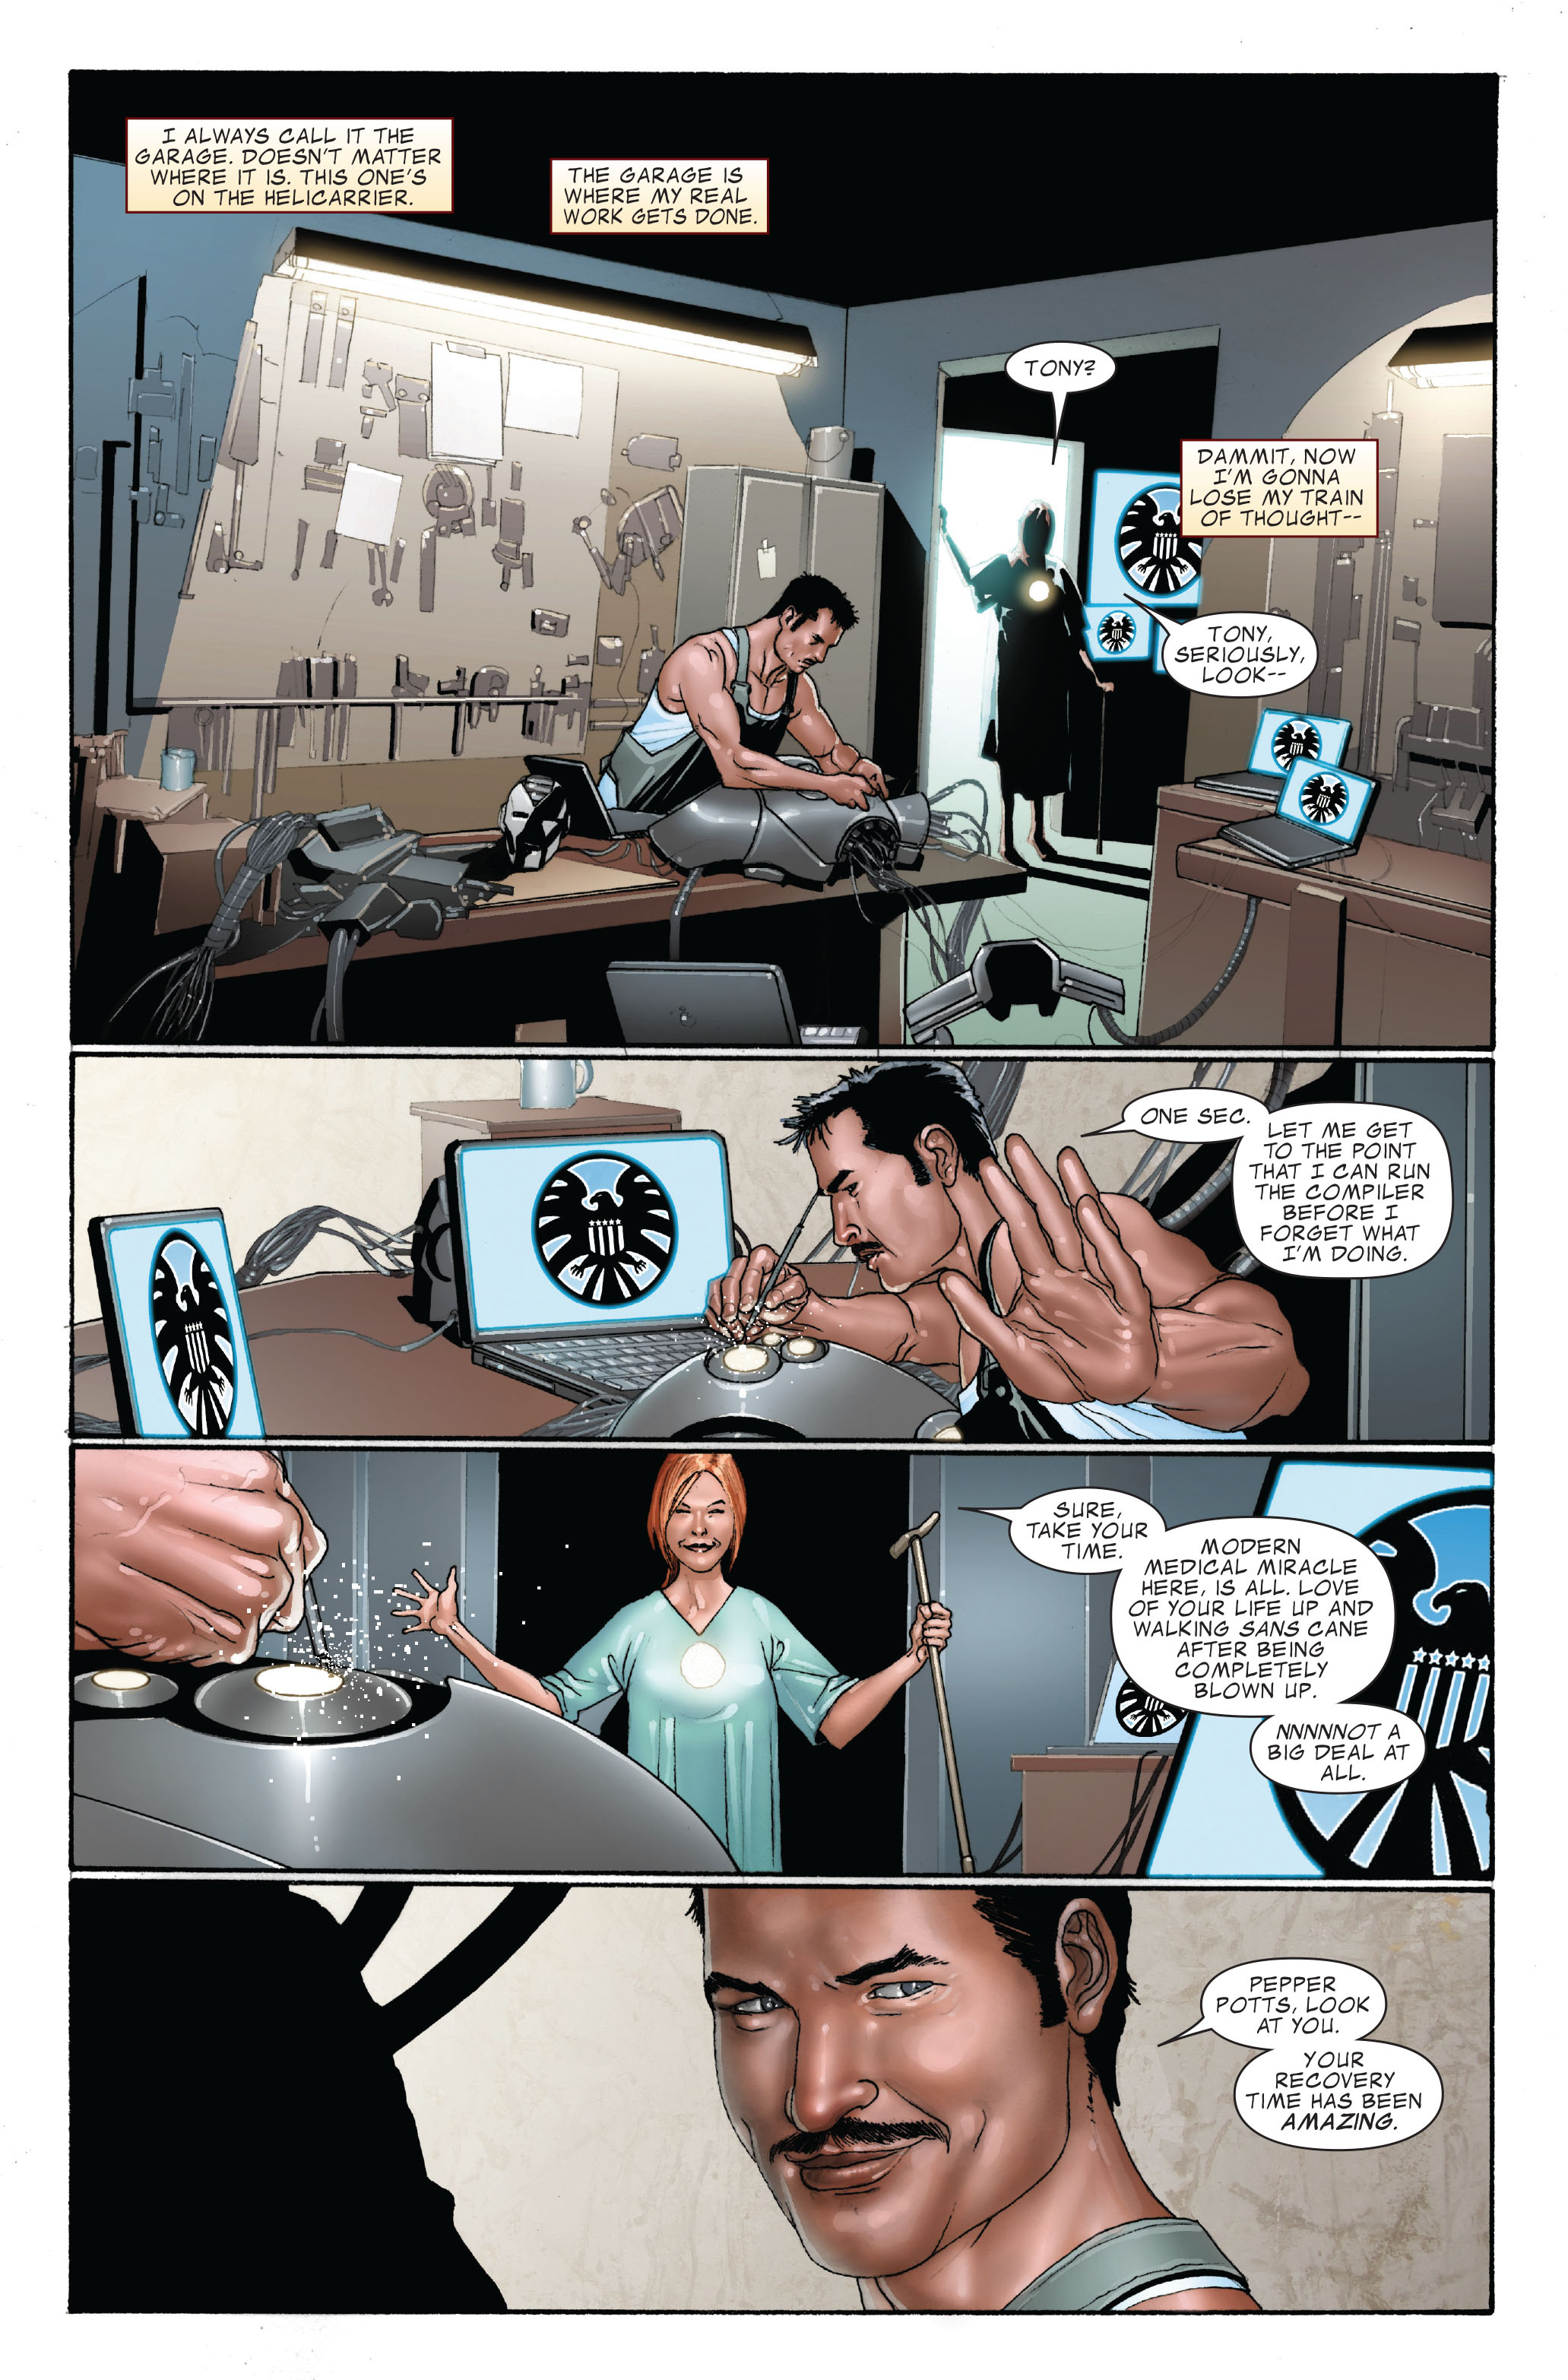 Invincible Iron Man (2008) 4 Page 5